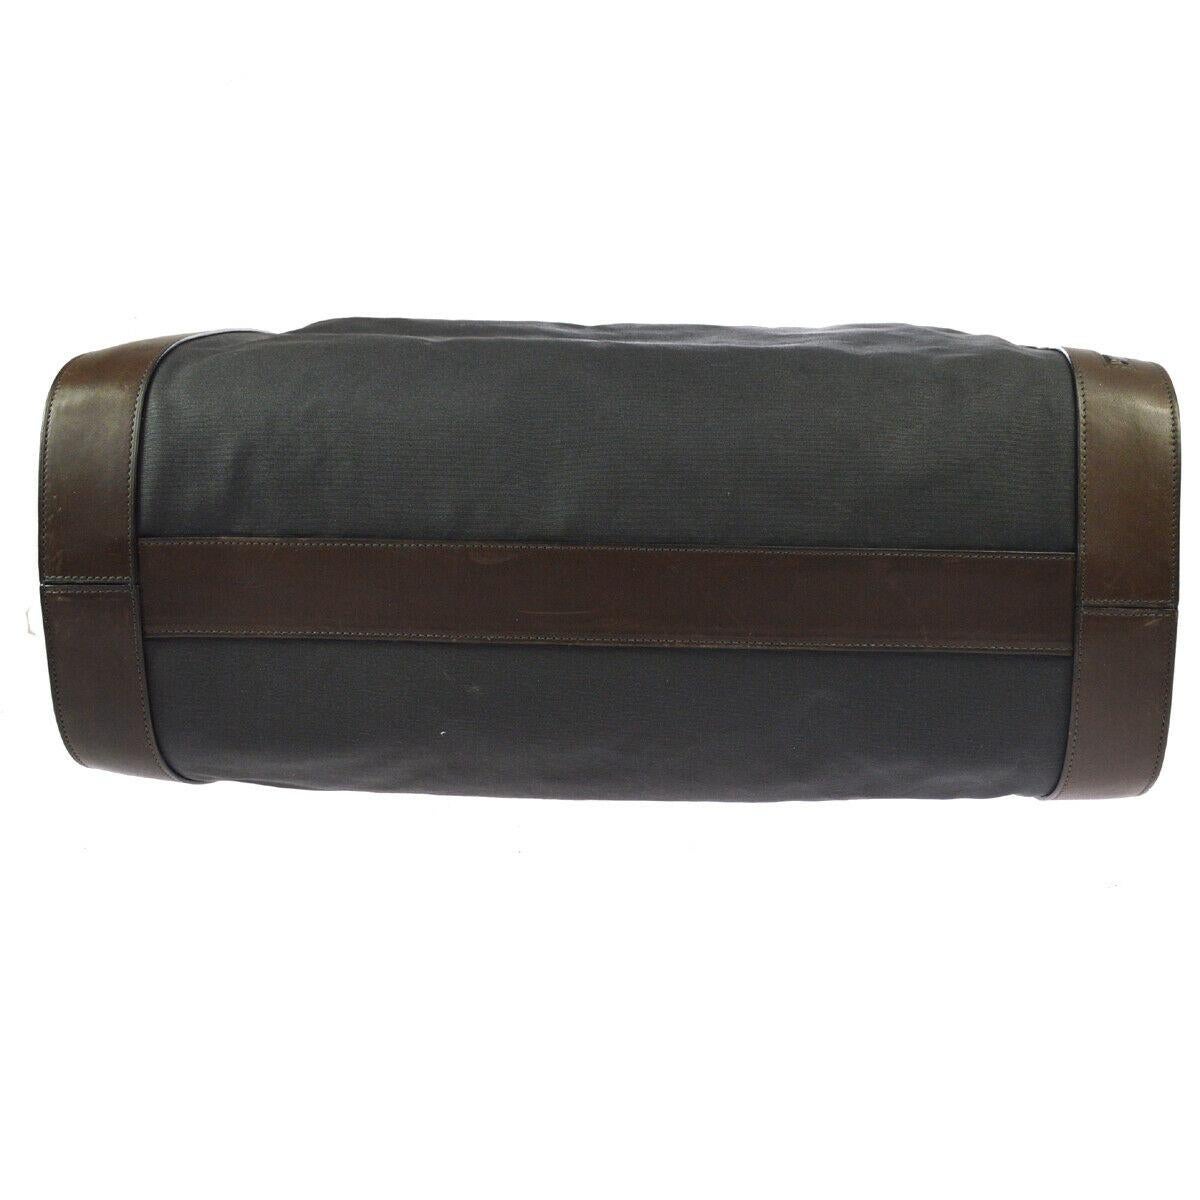 brown canvas travelling bag leisure style